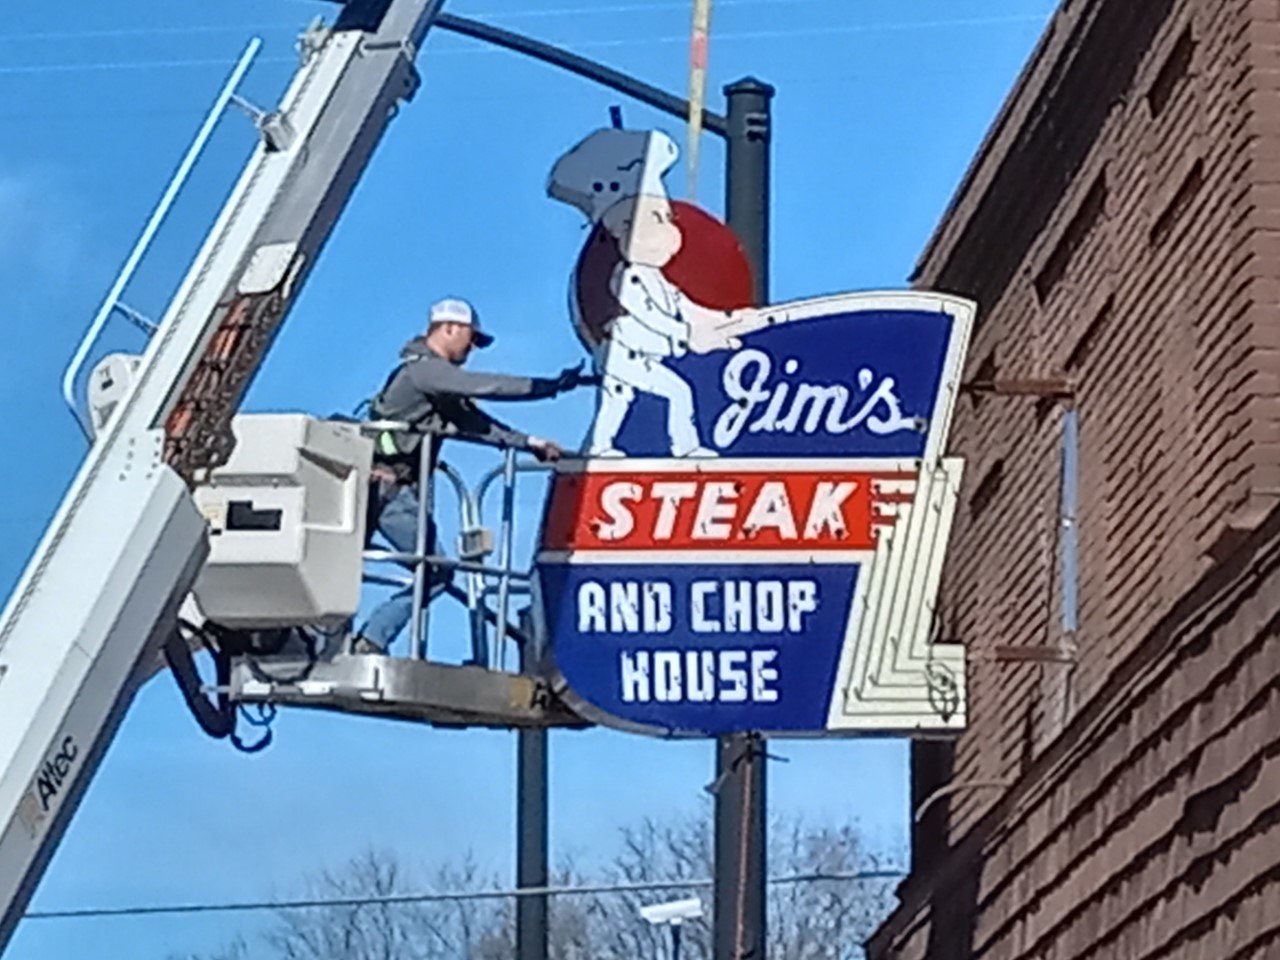 Under new ownership for just over a year, the former Jim’s Steakhouse is now Jim’s Steak & Chop House.